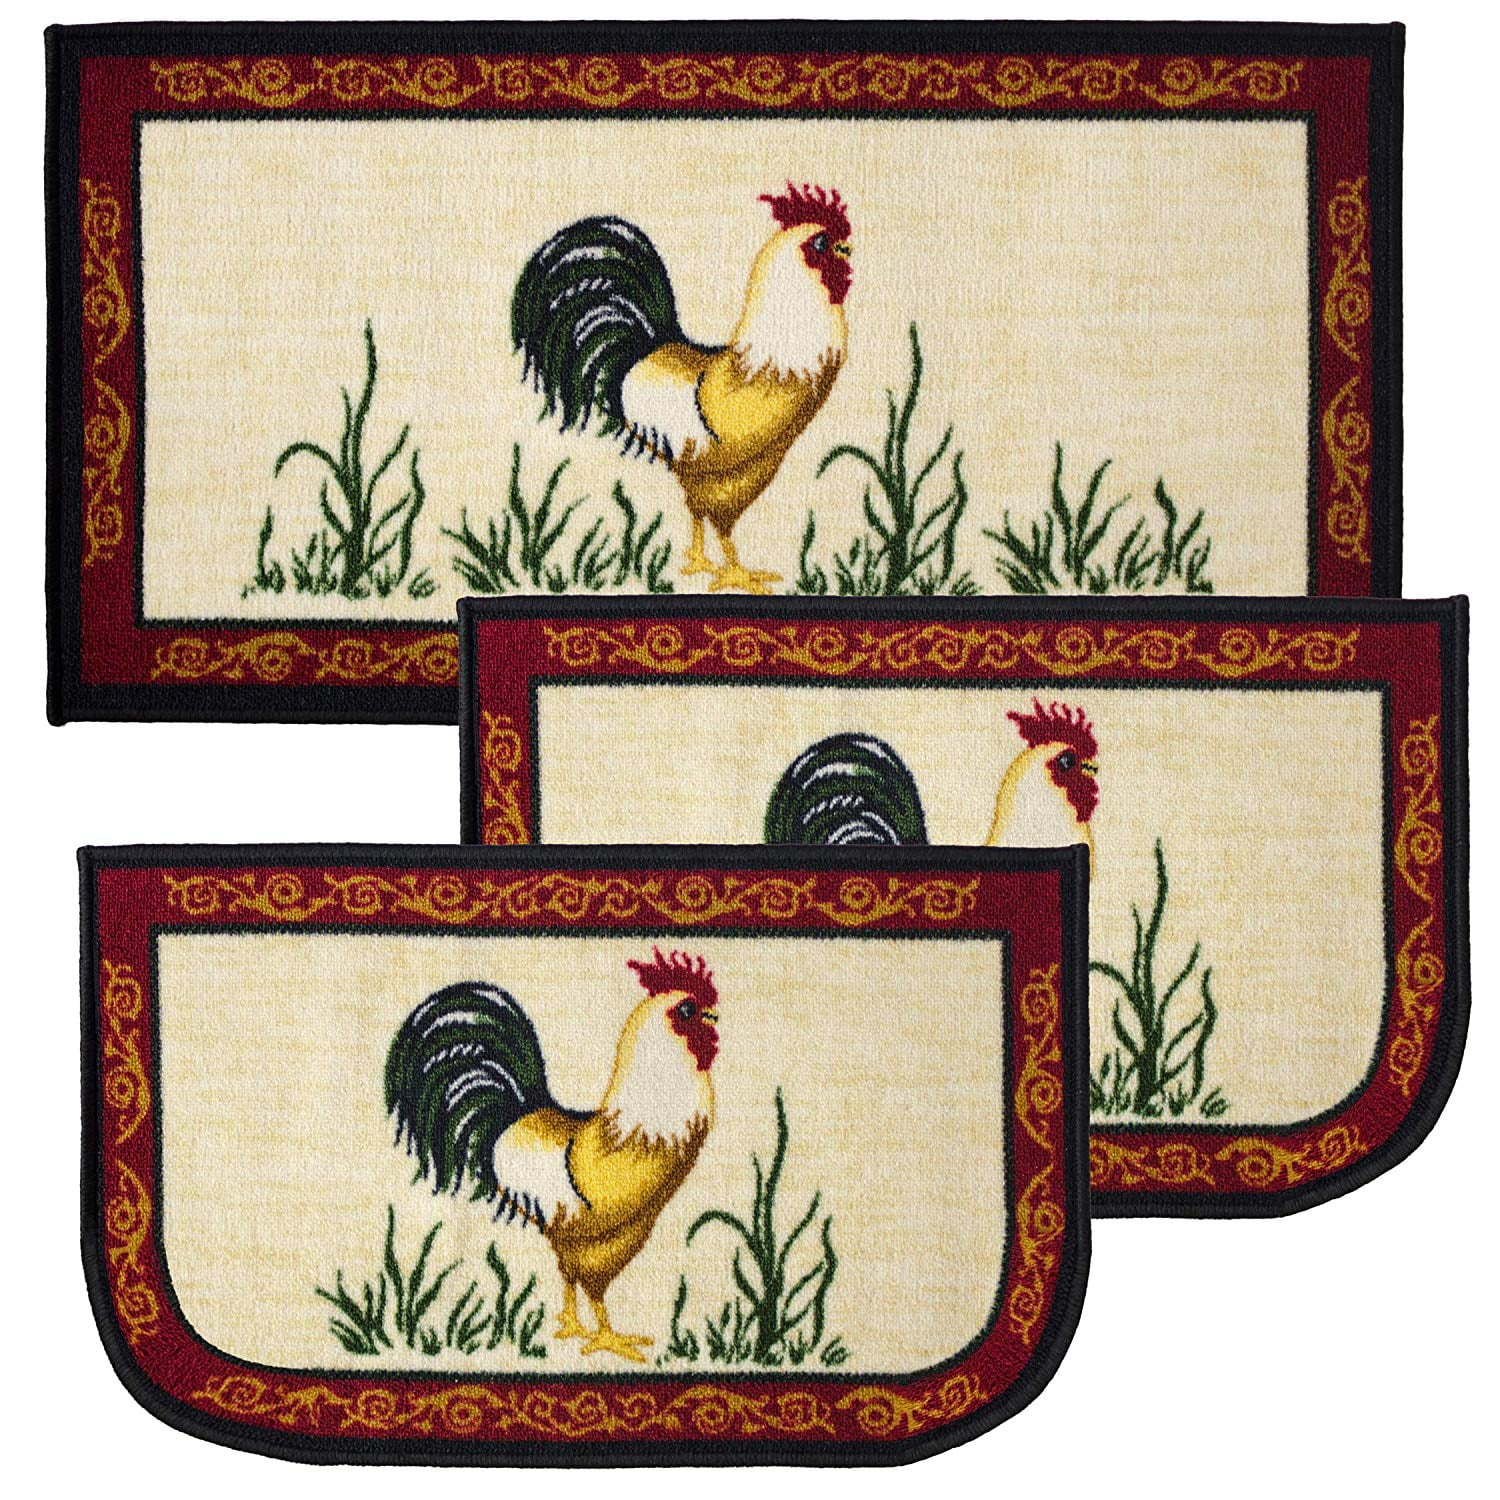 CAFE ROOSTER by BH PRINTED NYLON KITCHEN RUG nonskid back rec. 17" x 28" 